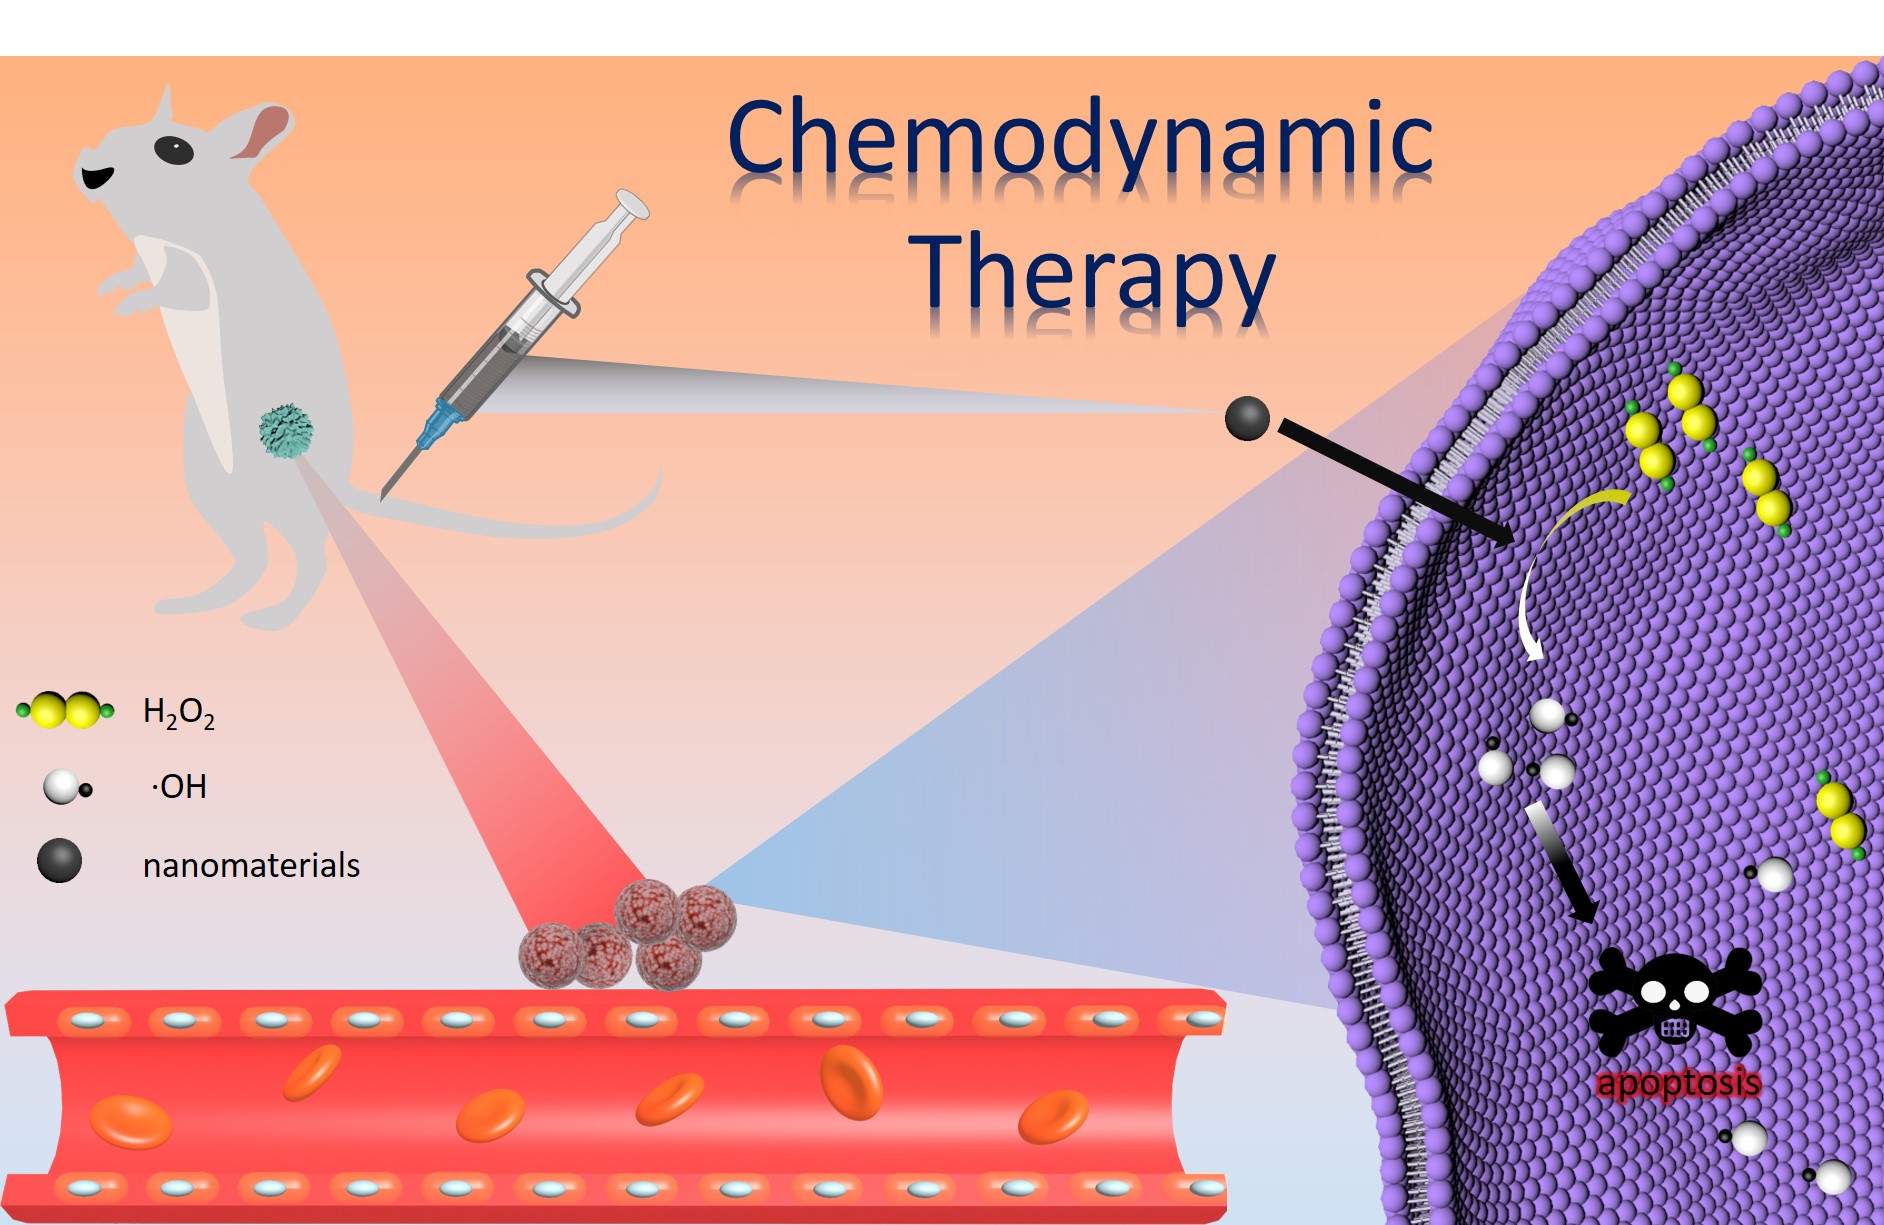 Researchers Outline Future Direction of Peroxidase in Chemodynamic Therapy